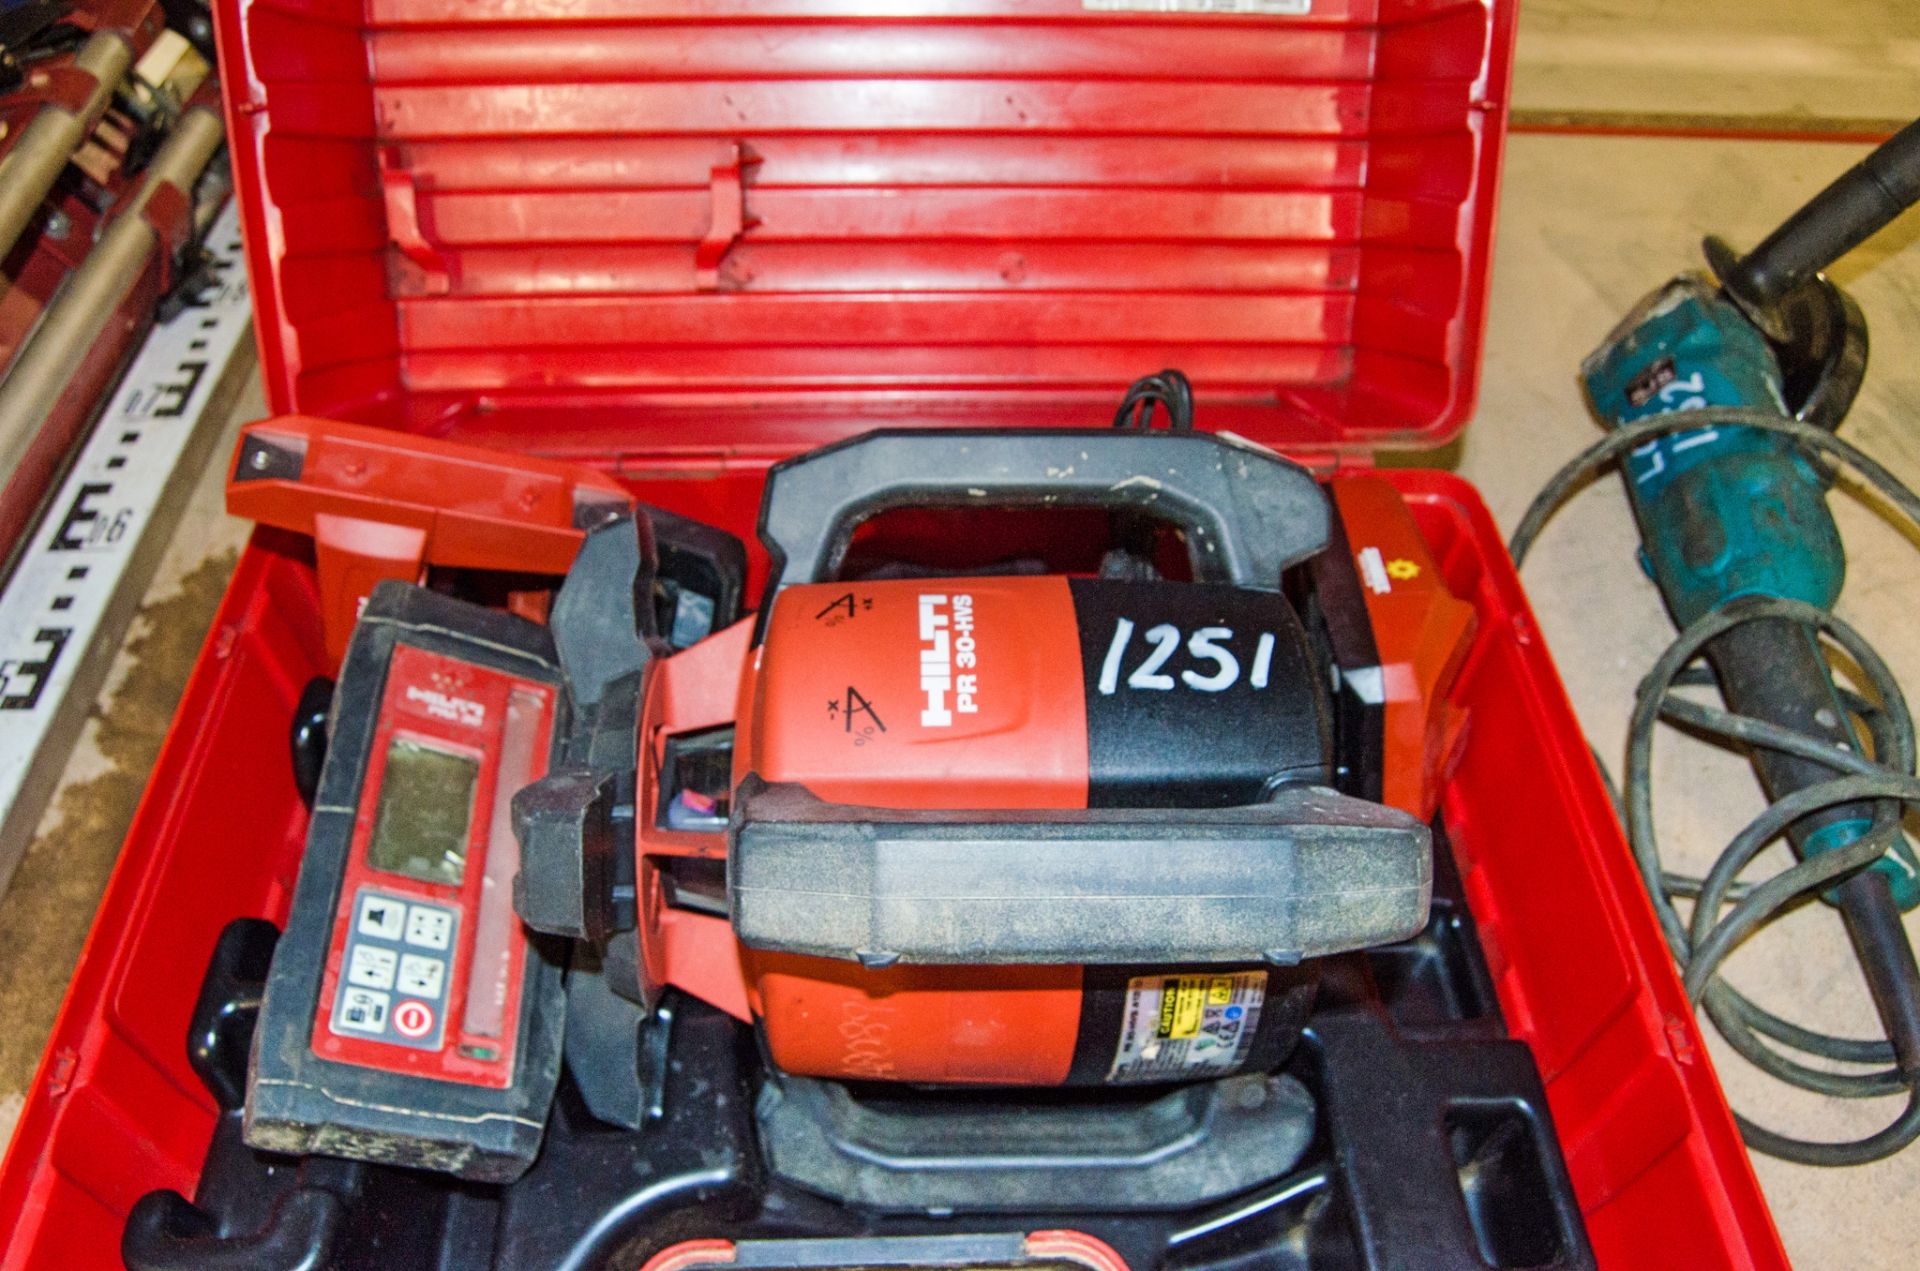 Hilti PR30-HVS rotating laser level c/w receiver, battery, clamp, charger and carry case A808941